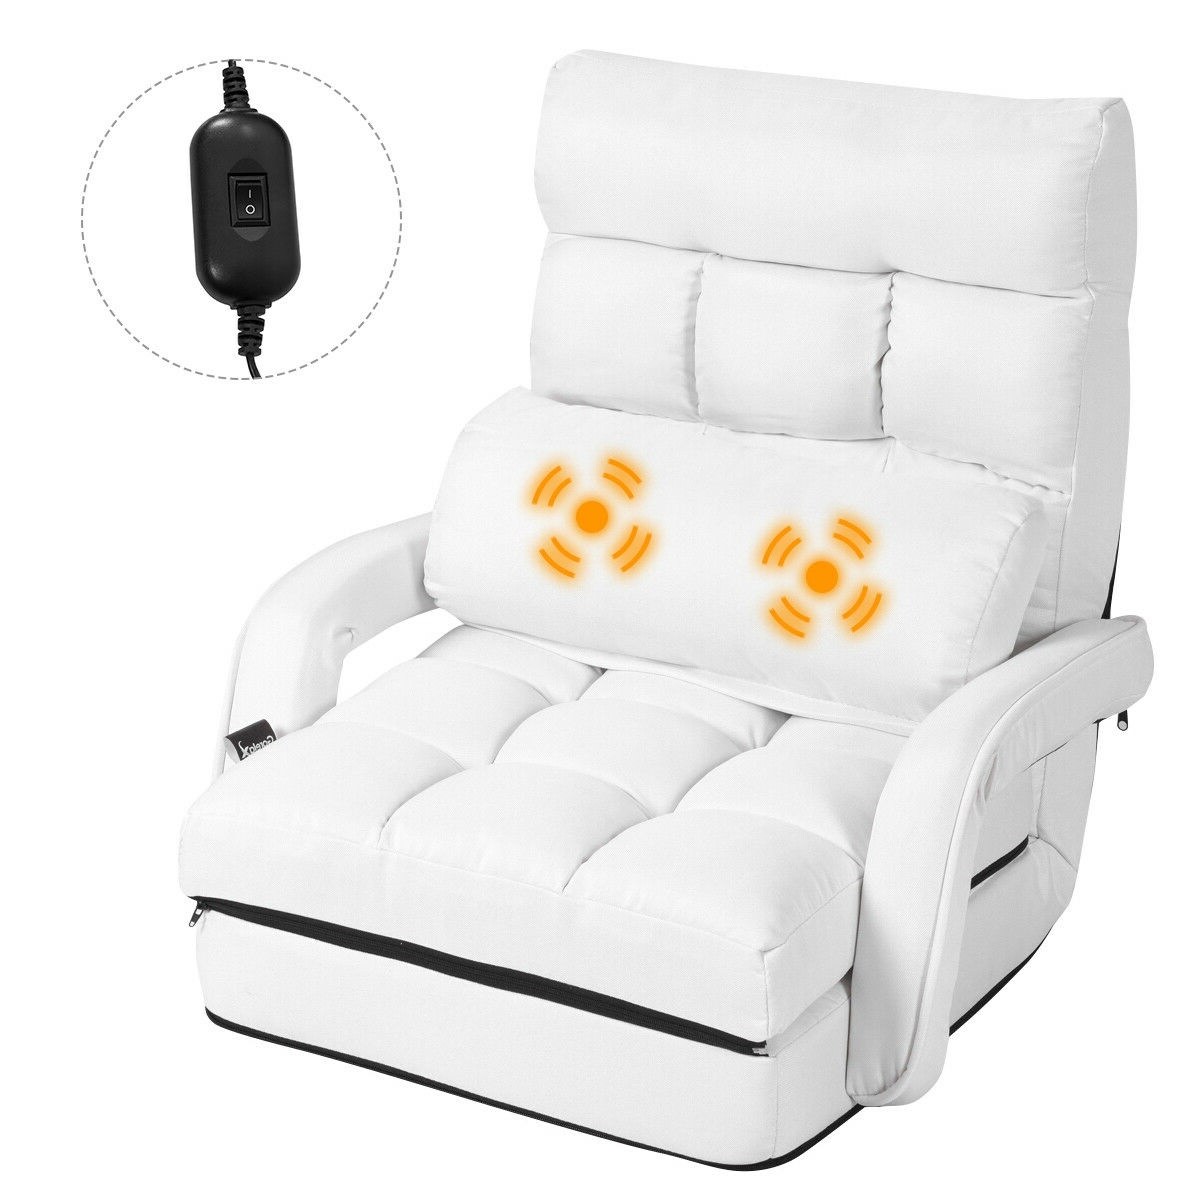 mini small sofa lazy leisure balcony foldable lounge chair floor folding with adjustable backrest comfortable bed single lounger sleeper seating cushions bay window chairs home office mattress meditat 